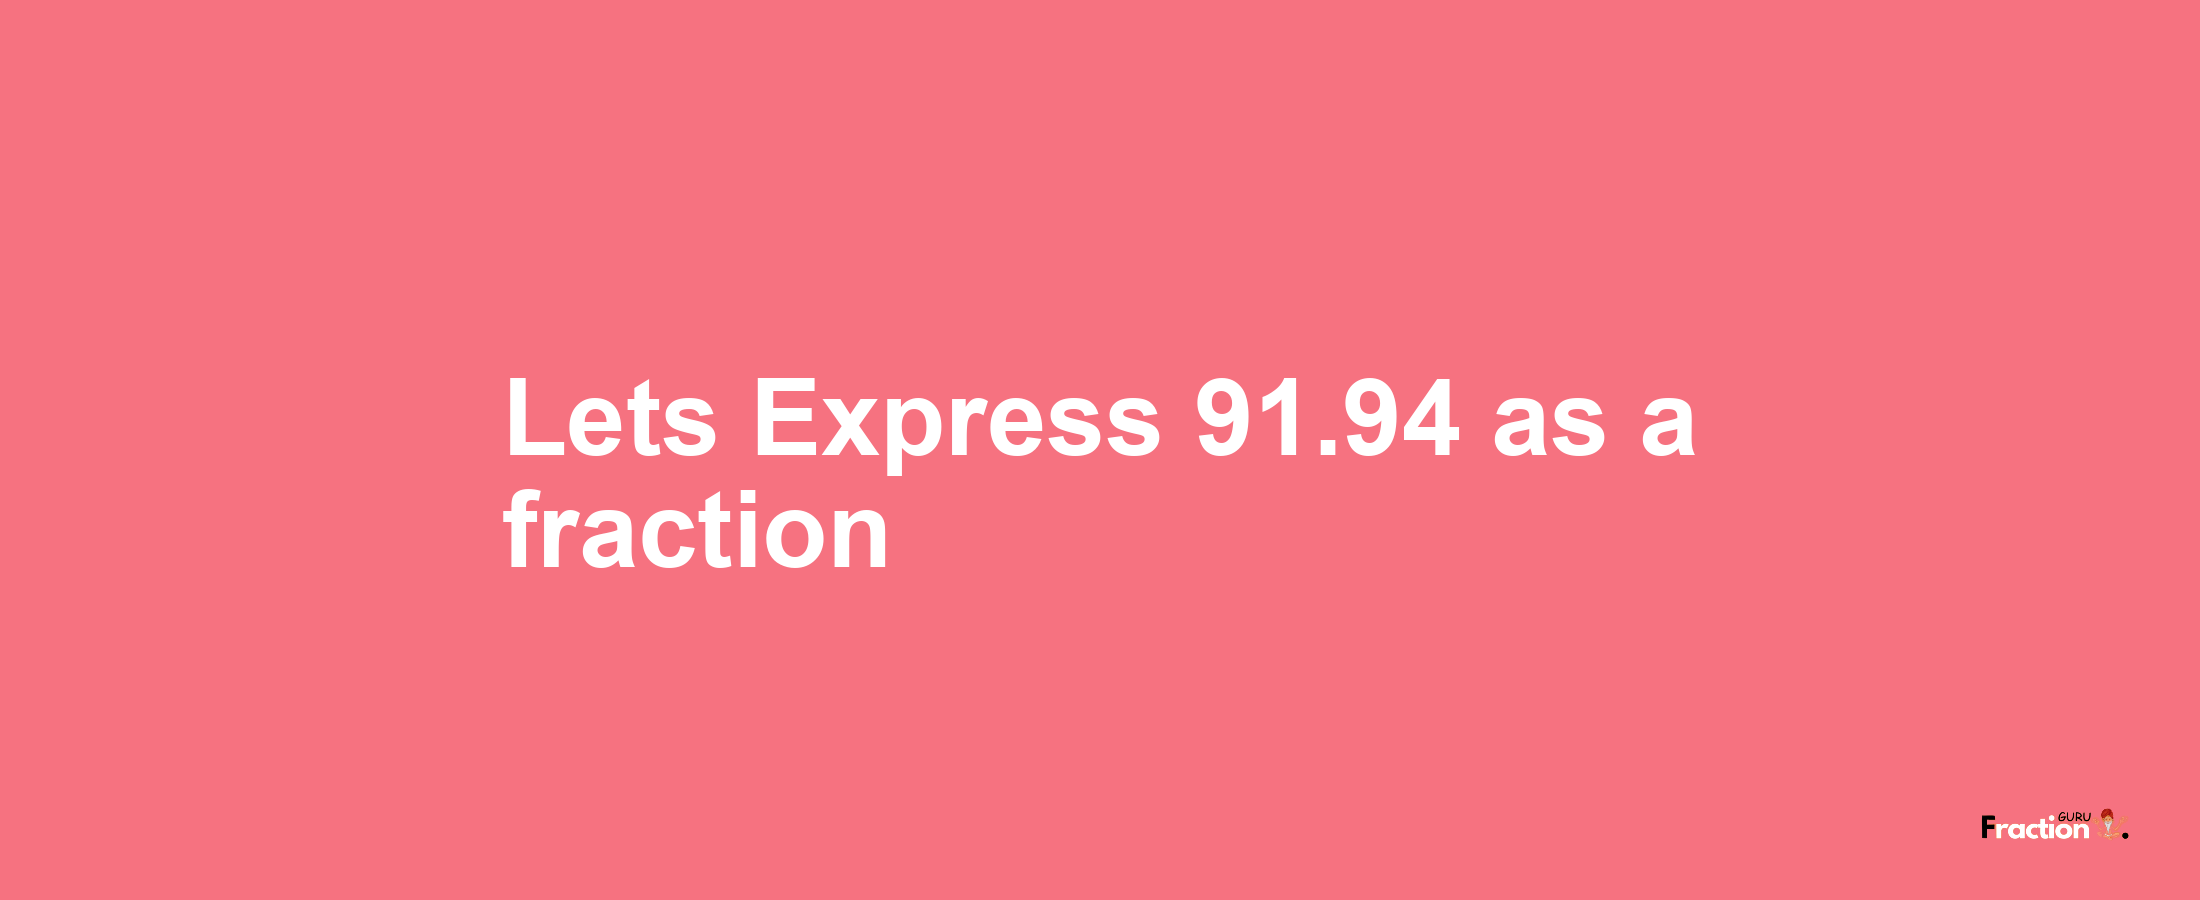 Lets Express 91.94 as afraction